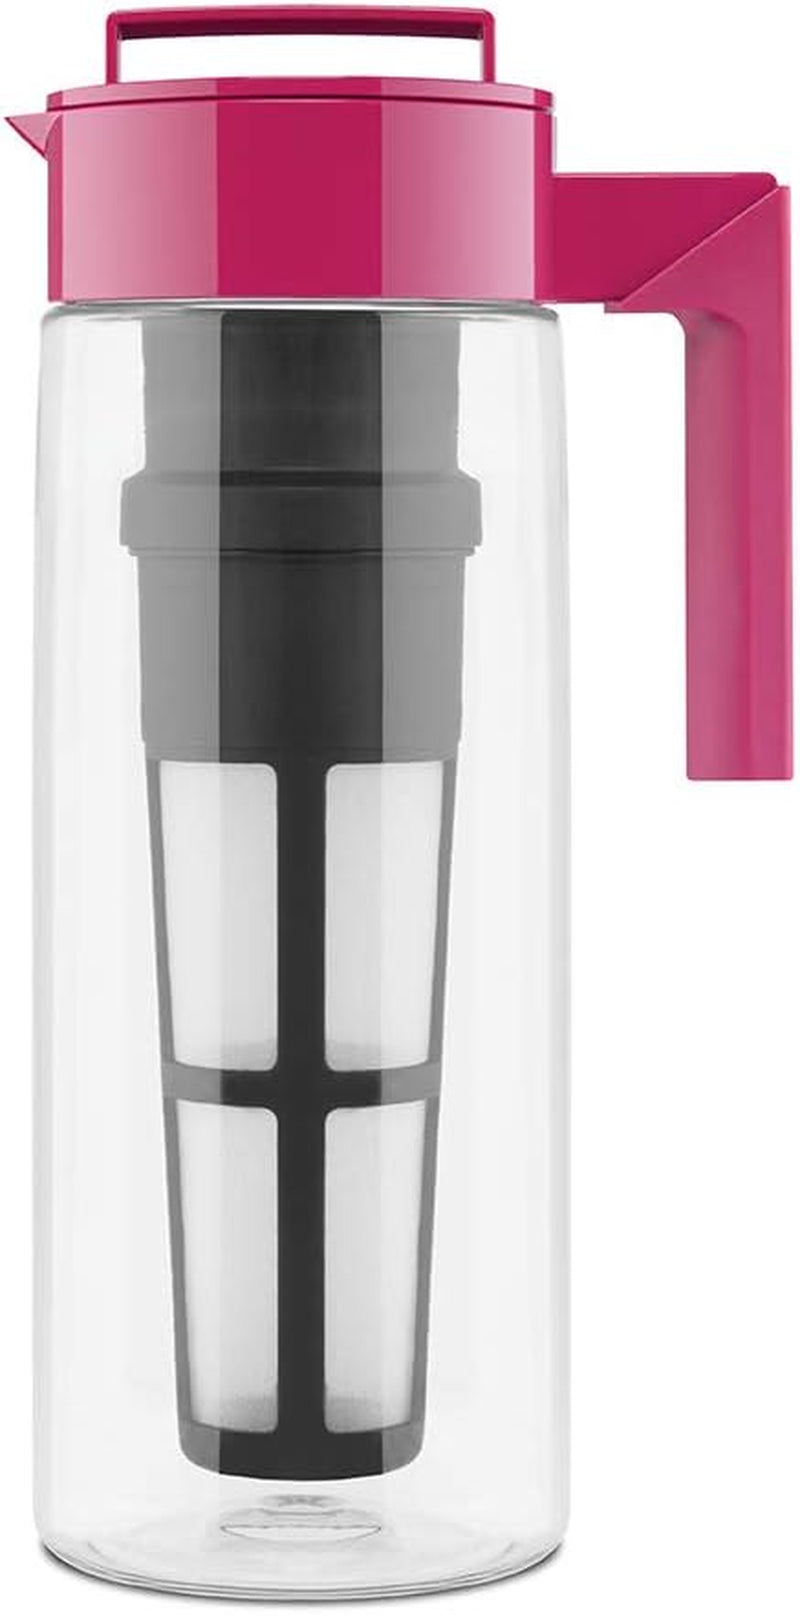 Takeya Iced Tea Maker with Patented Flash Chill Technology Made in USA, 2 Quart, Raspberry & Fruit Infuser